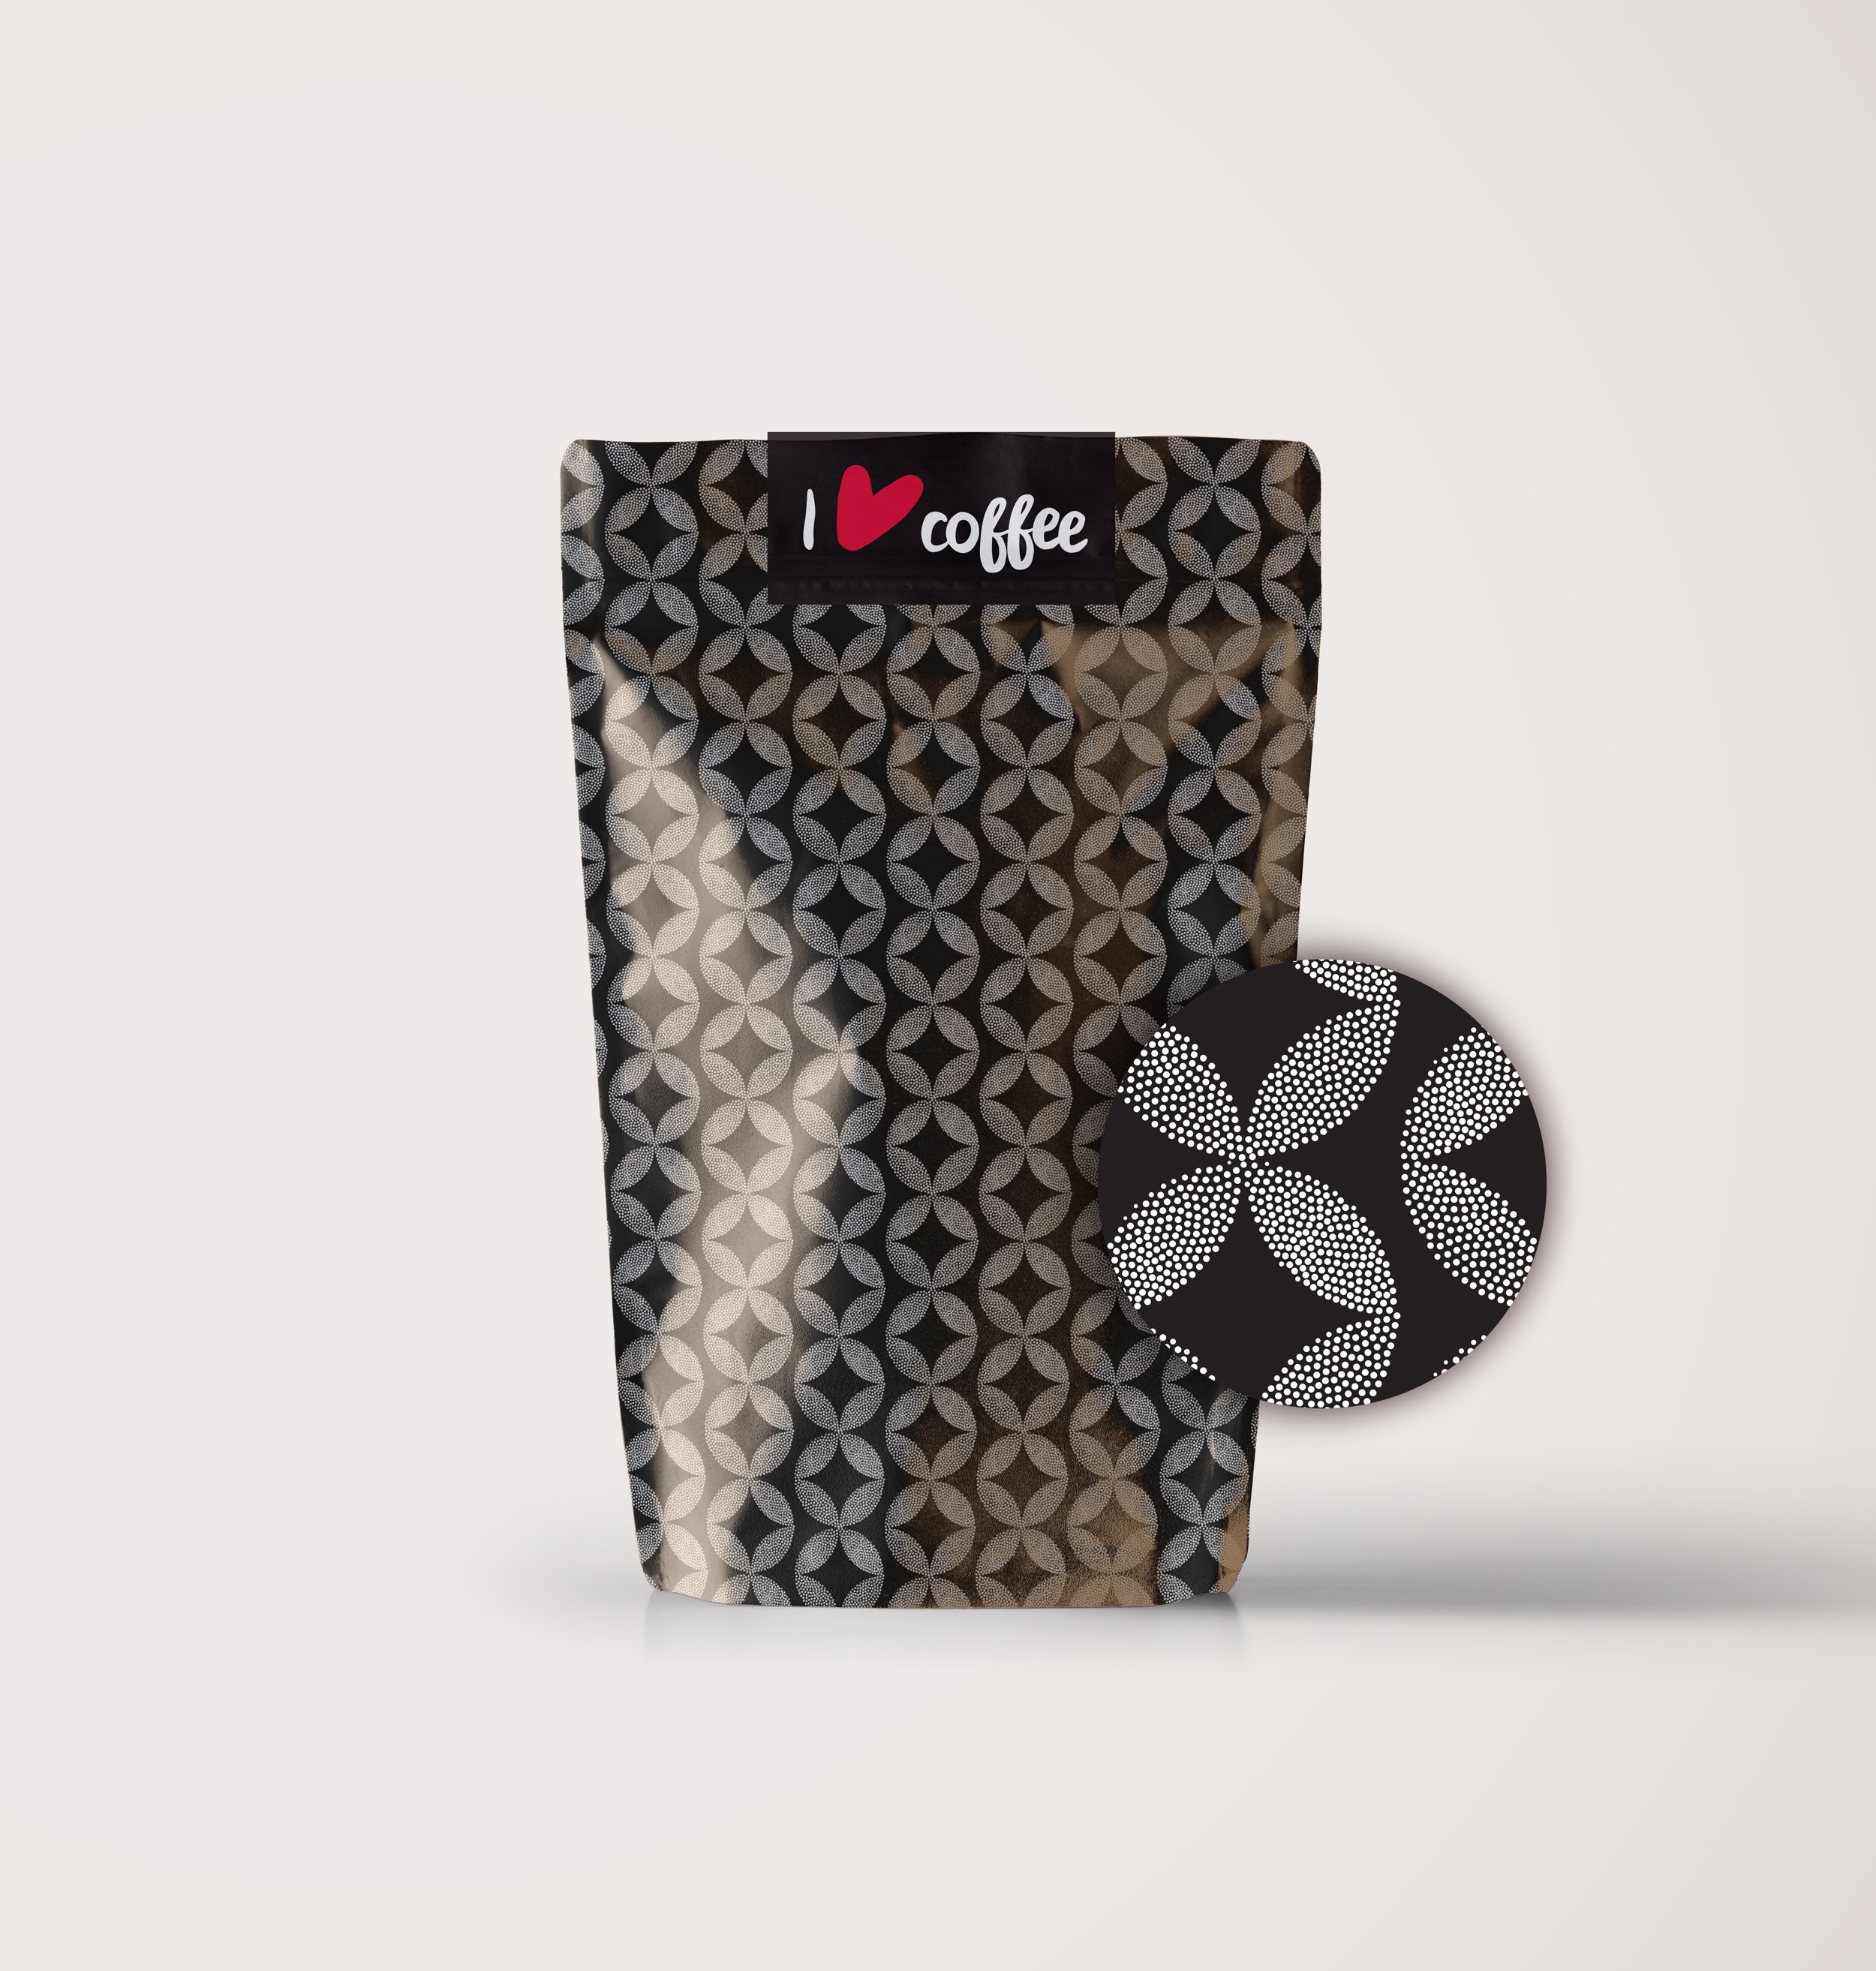 Cool black print for coffee package.